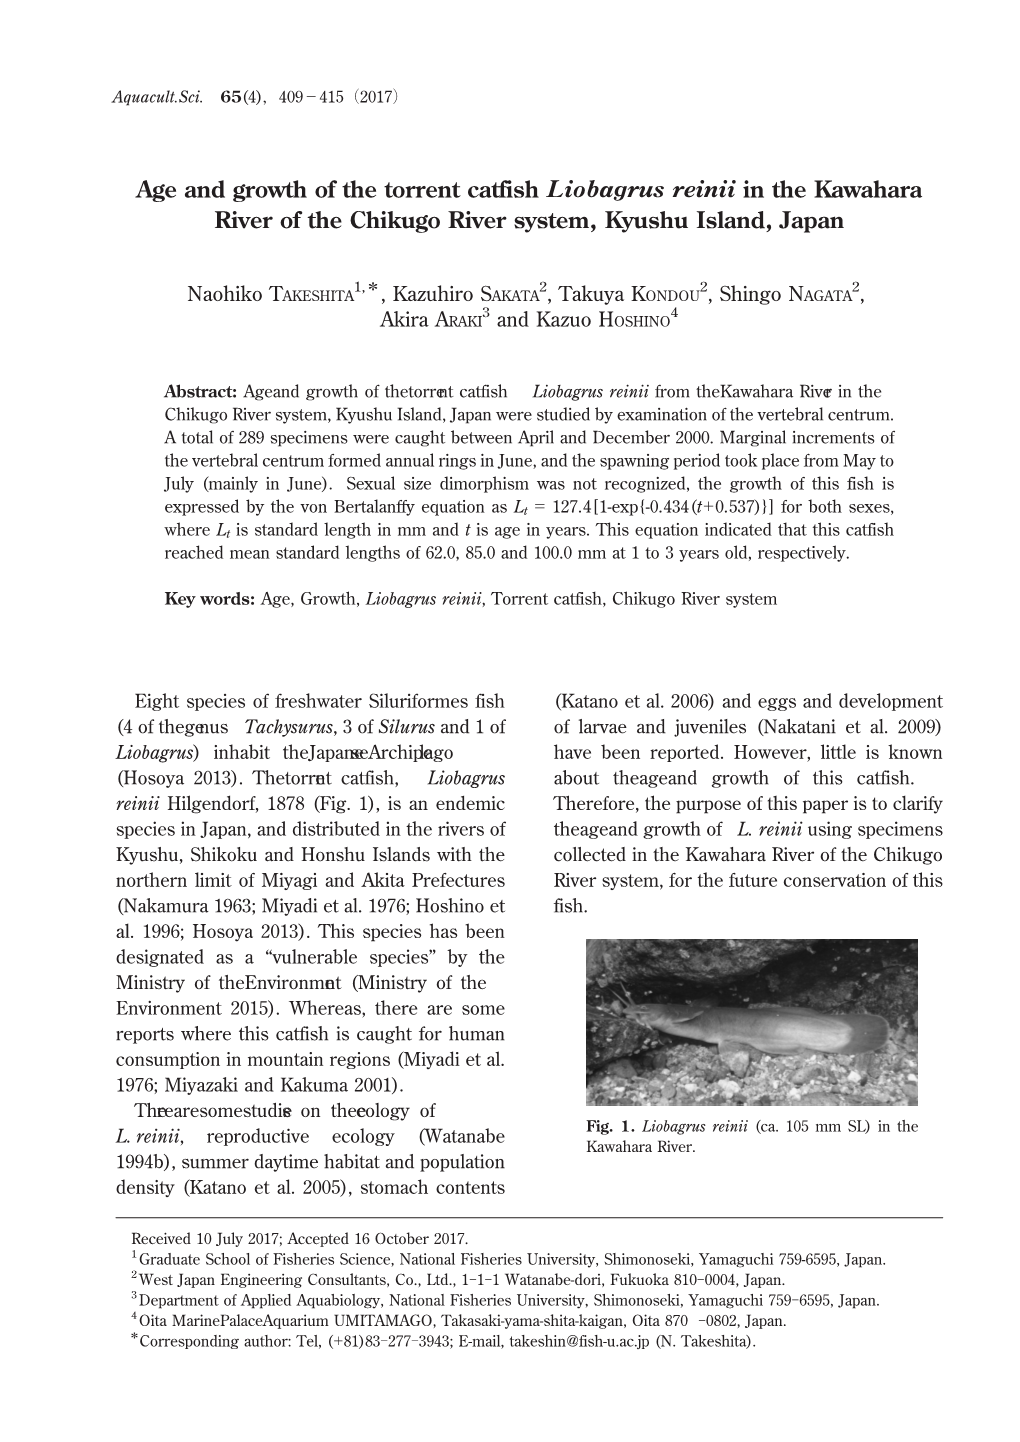 Age and Growth of the Torrent Catfish Liobagrus Reinii in the Kawahara River of the Chikugo River System, Kyushu Island, Japan